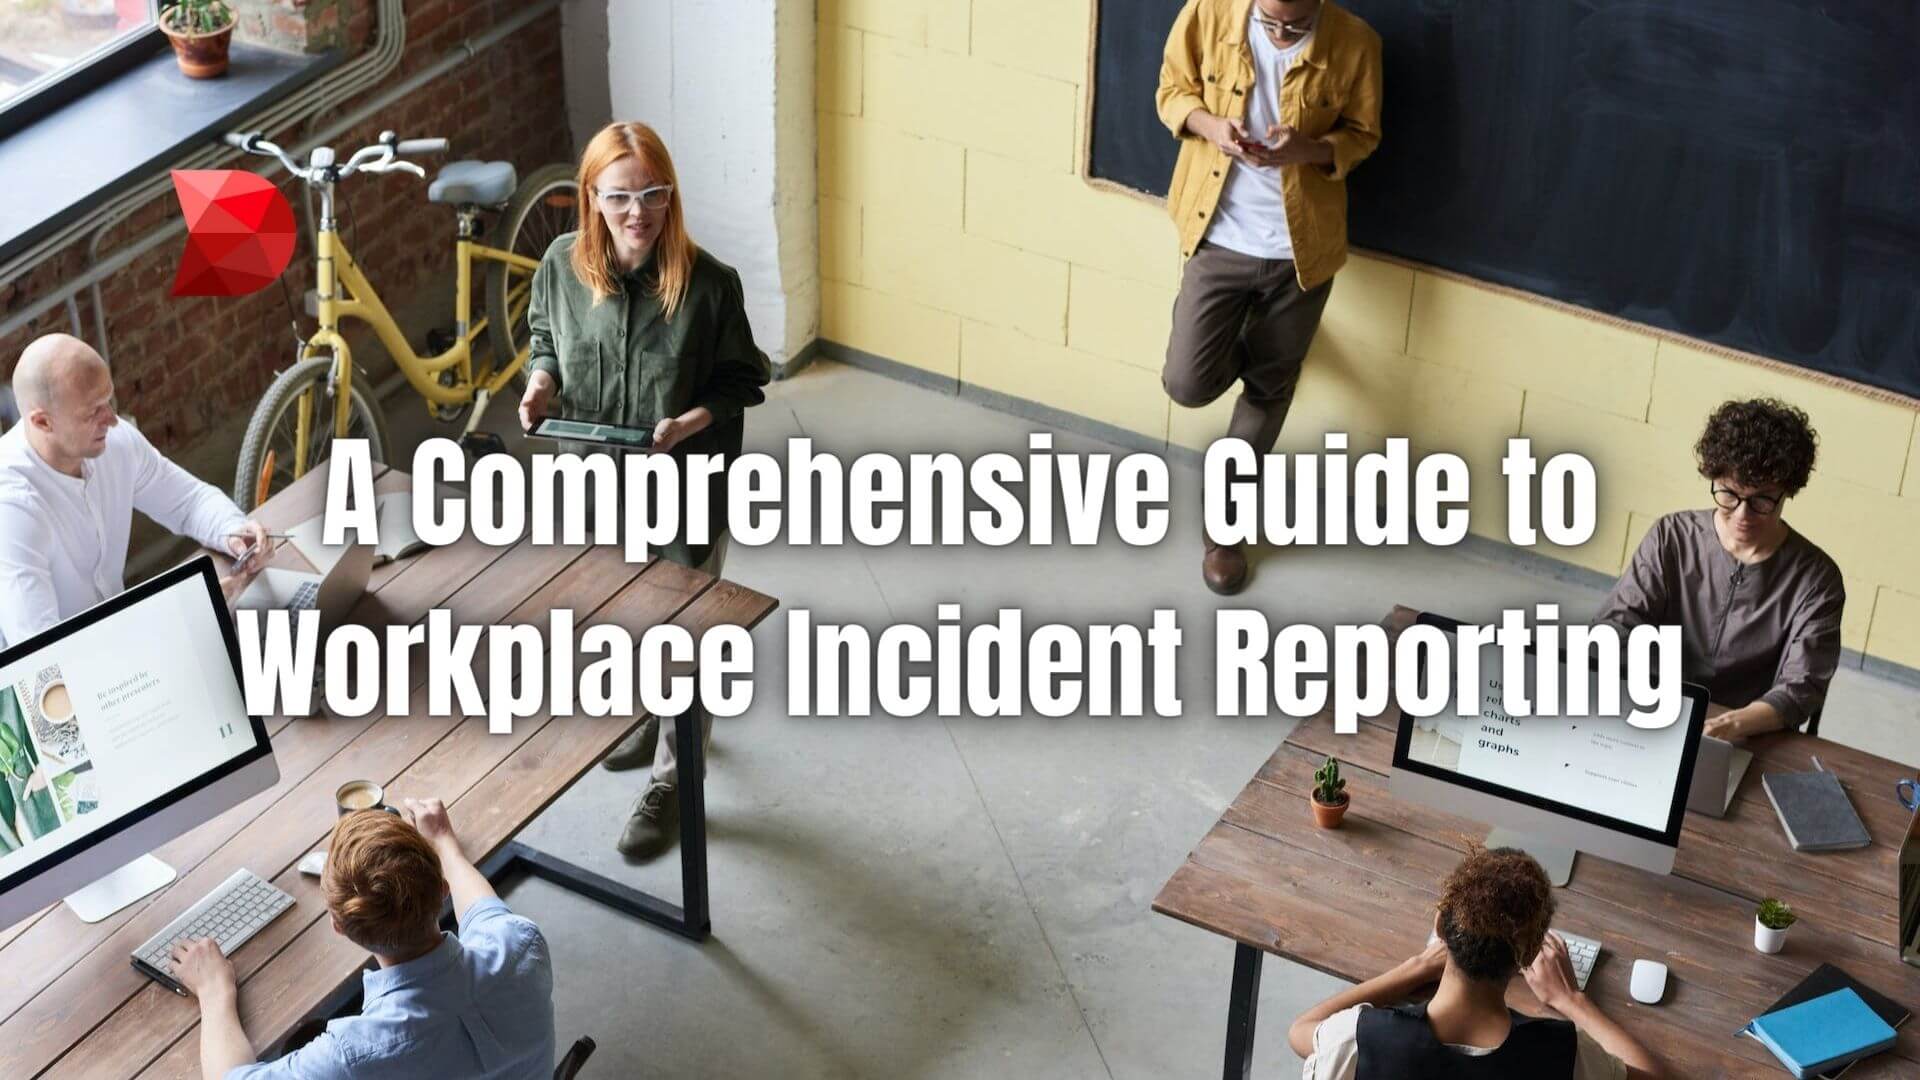 Master workplace incident reporting with our comprehensive guide. Click here to learn best practices for swift and effective response.